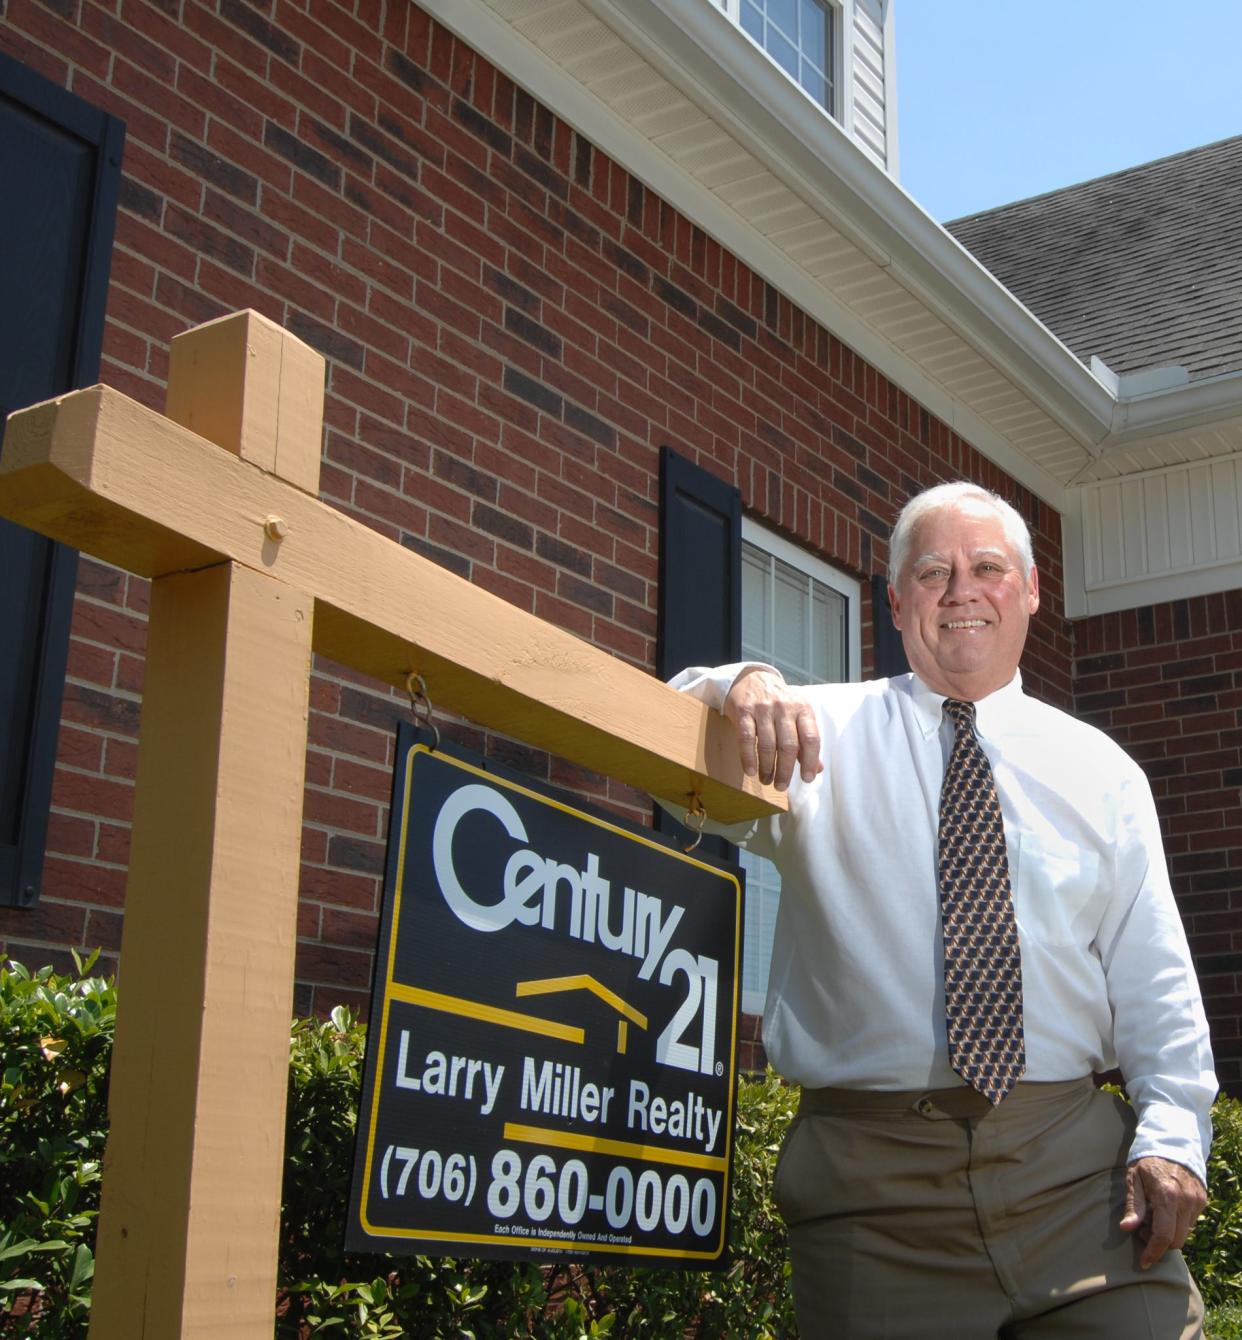 Larry Miller stands next to one of his familiar Century 21 real-estate signs in this photo from 2008. Miller died Sept. 13 at age 77.